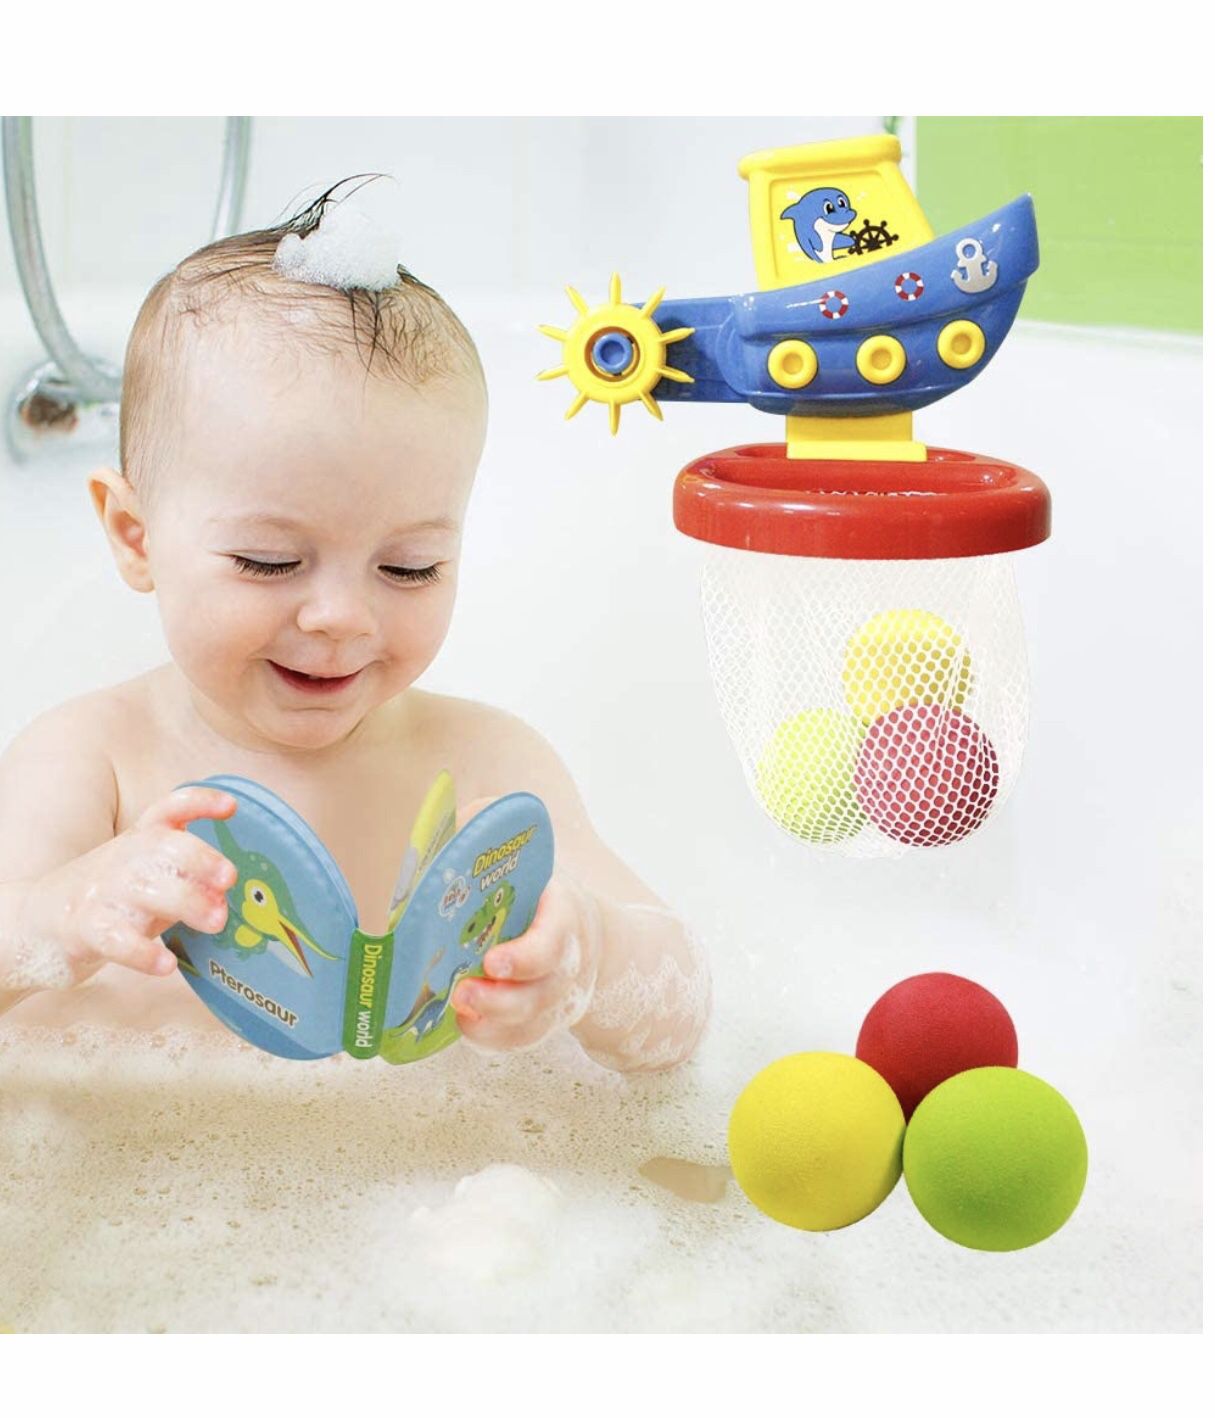 HANMUN Shoot and Splash Basketball Hoop Bathtub Shooting Game - Bath Toy Playset for Kids and Toddlers - 3 Balls Included